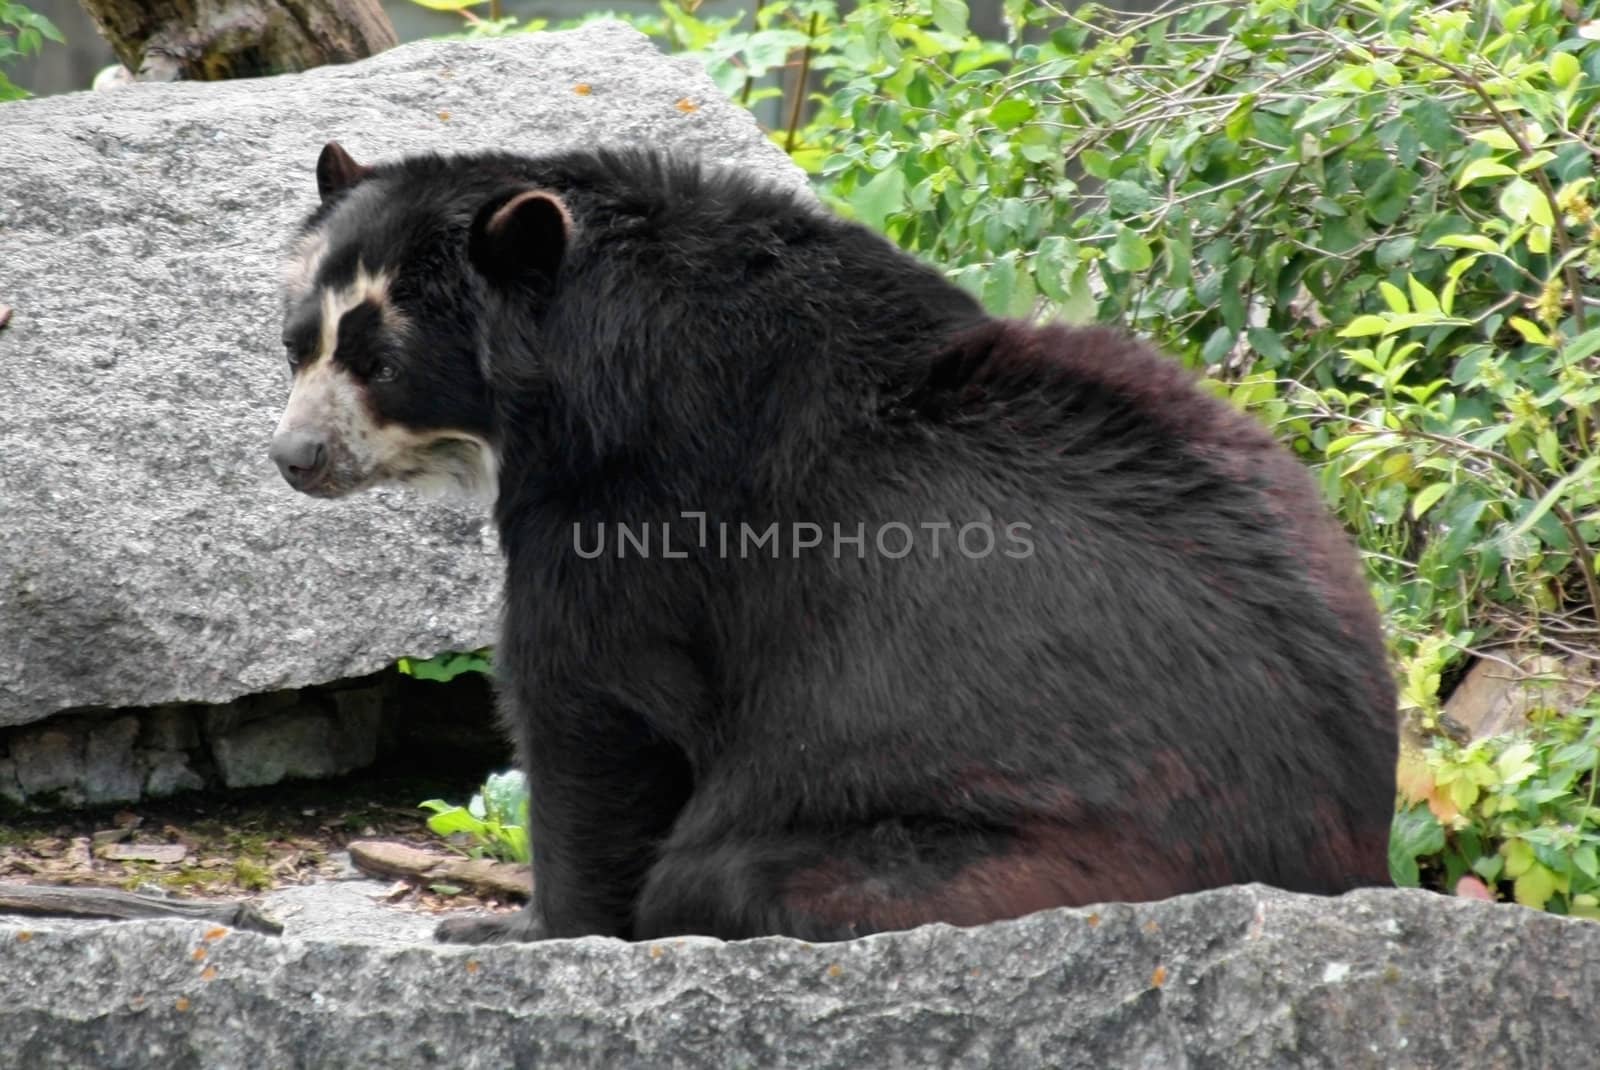 This image shows a portrait from a Andean bear